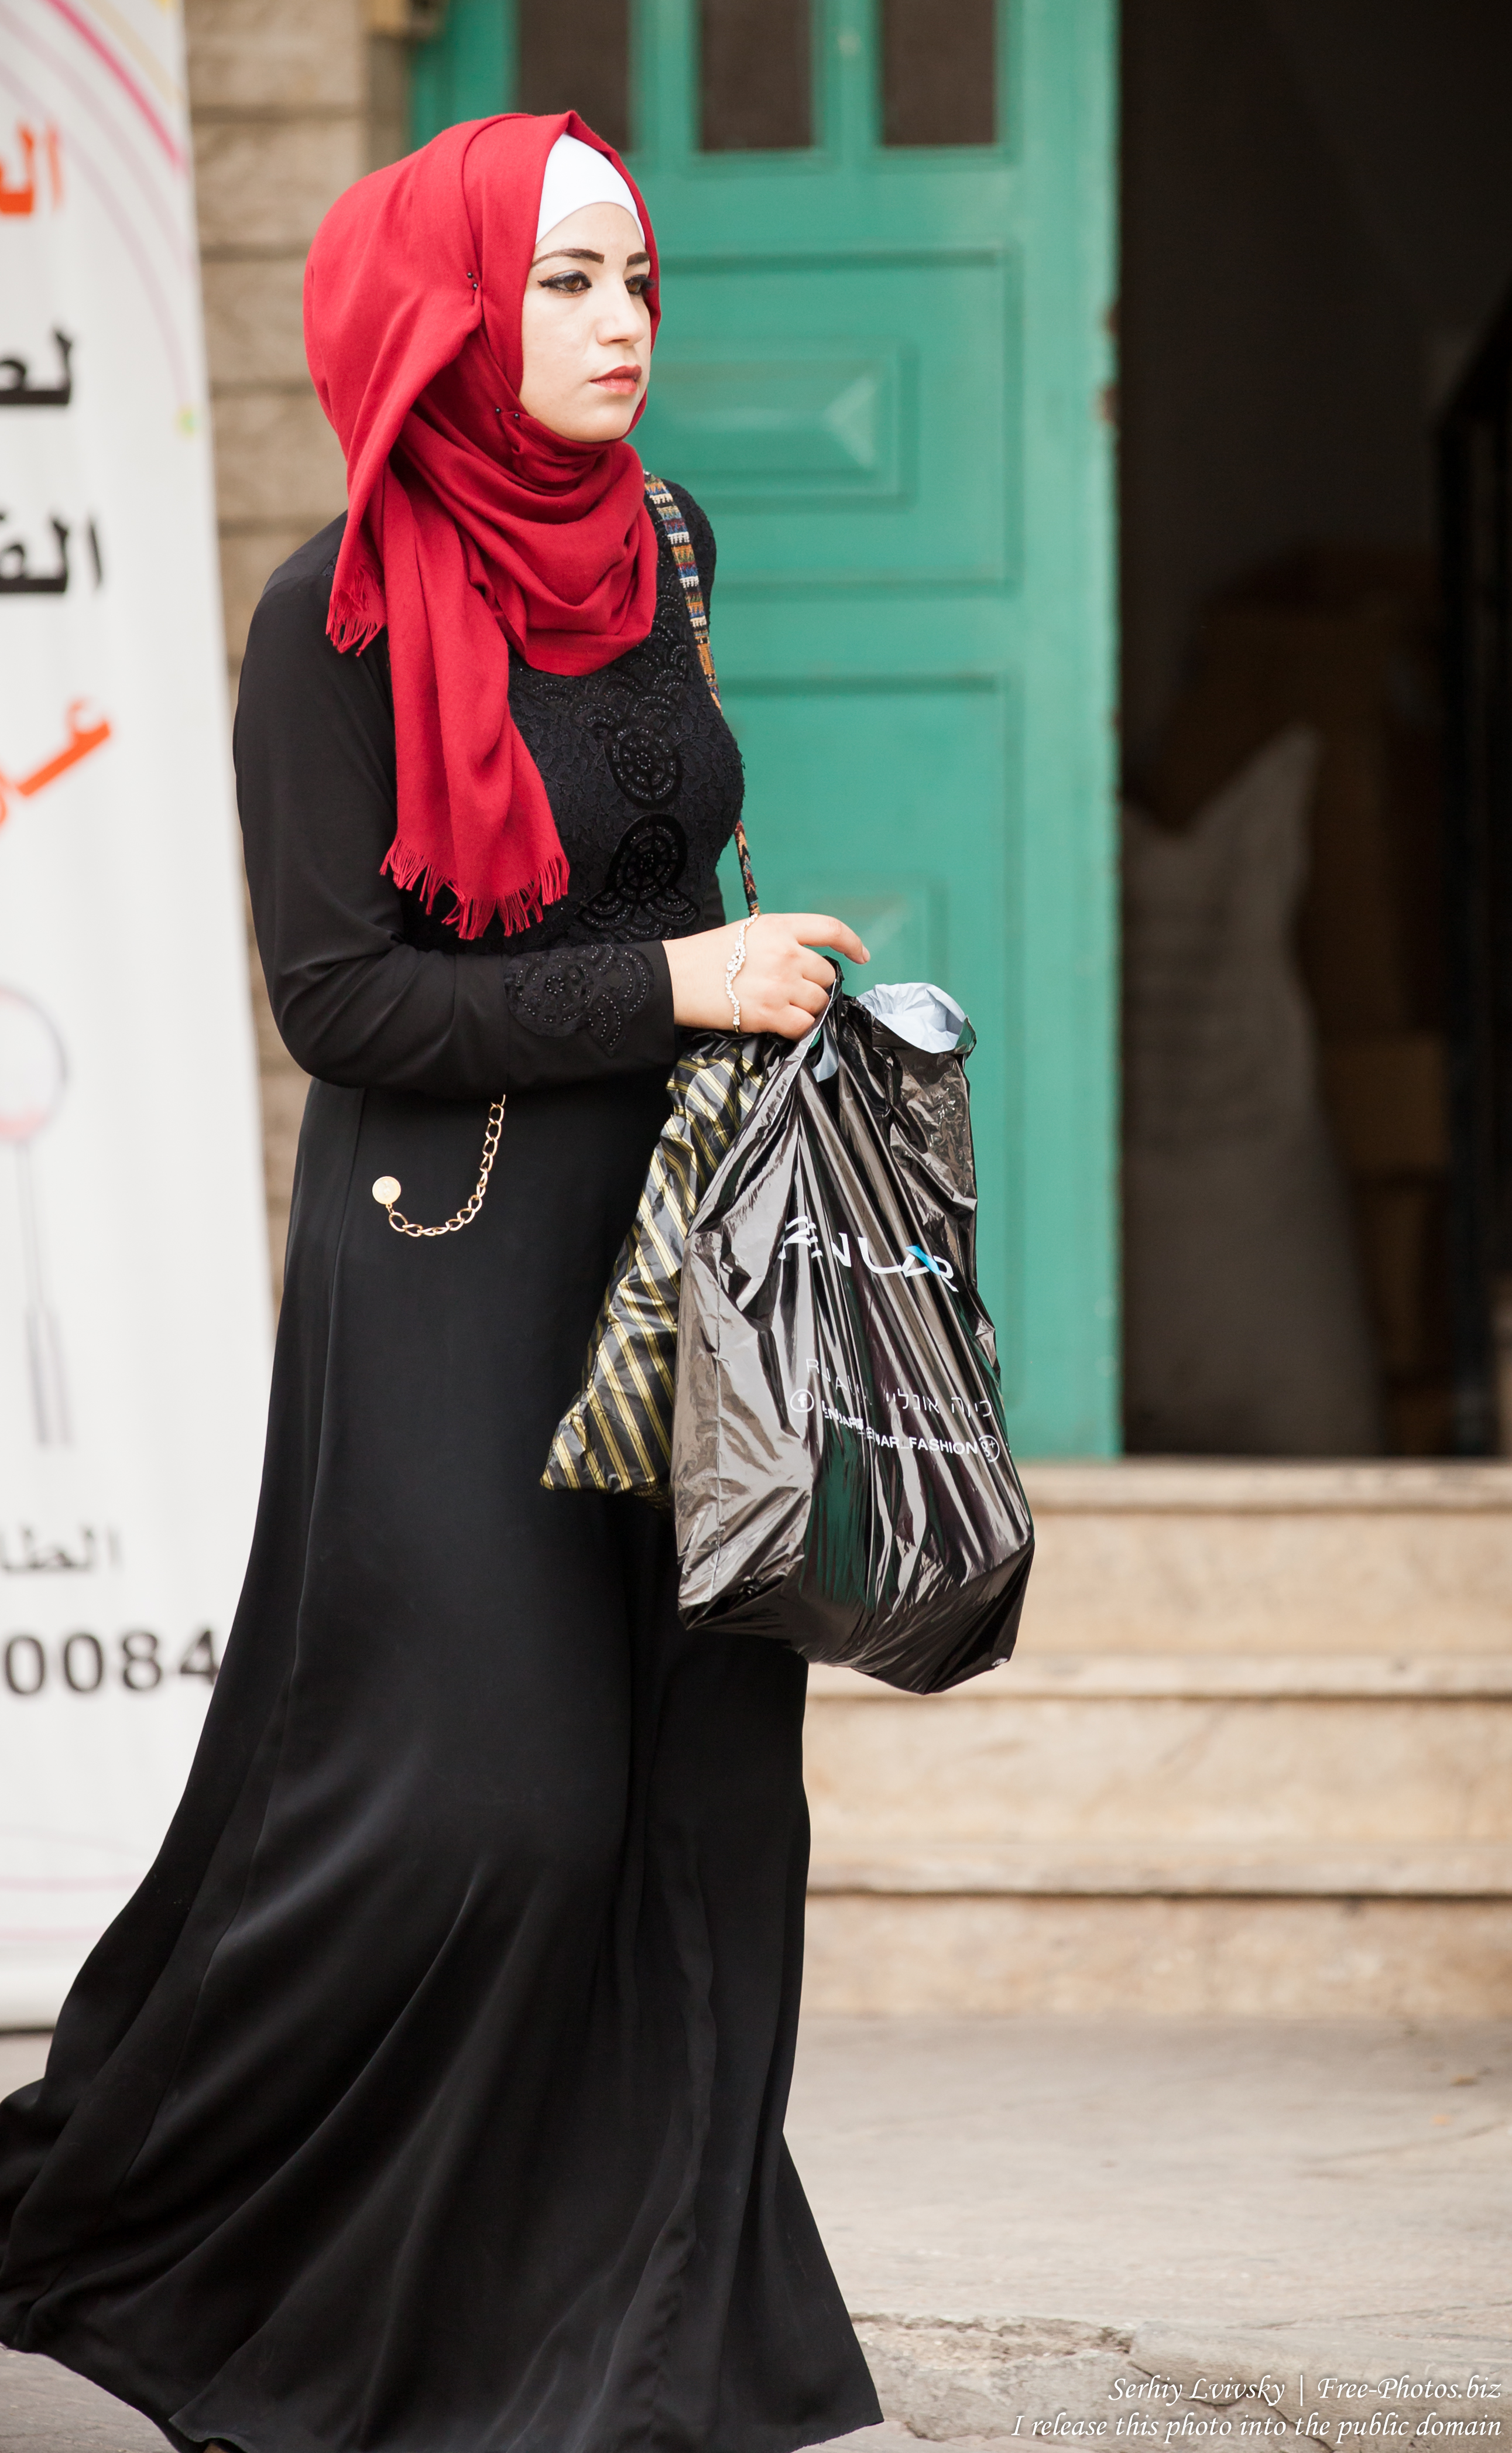 a young woman in Bethlehem, Palestine, photographed by Serhiy Lvivsky in September 2015